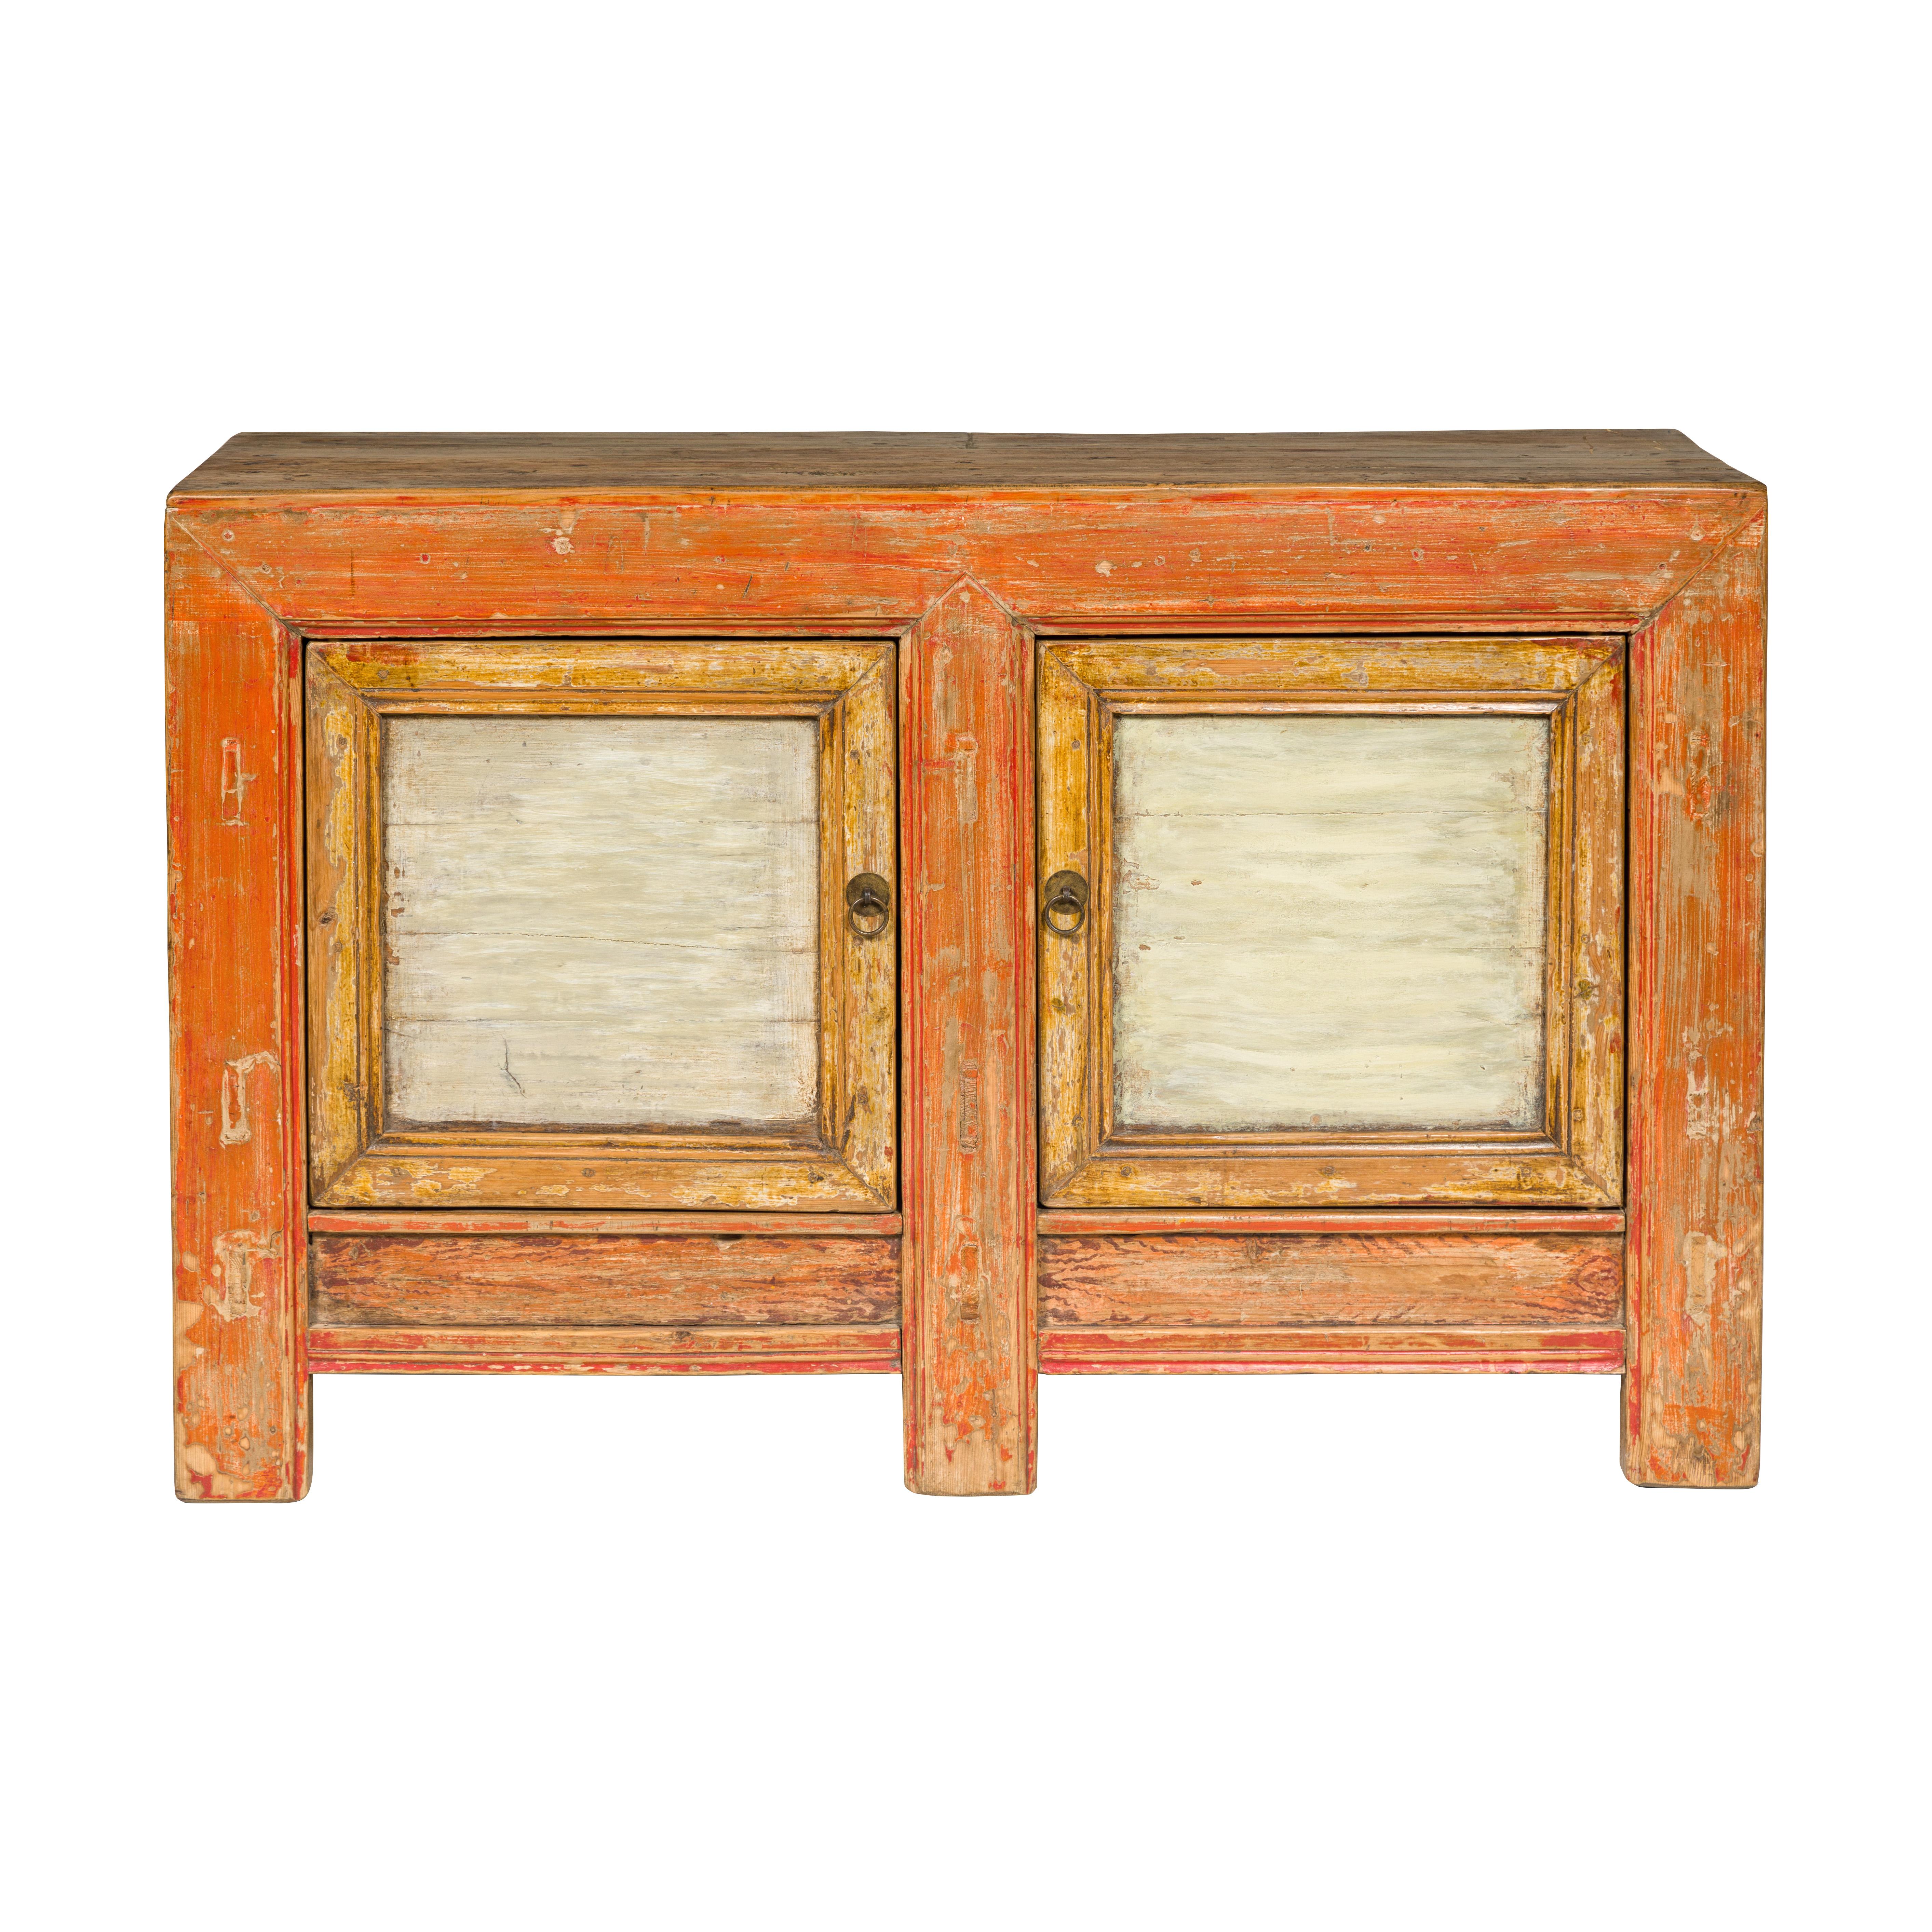 Country Style Painted Two-Door Buffet with Distressed Orange and Off-White Color For Sale 13